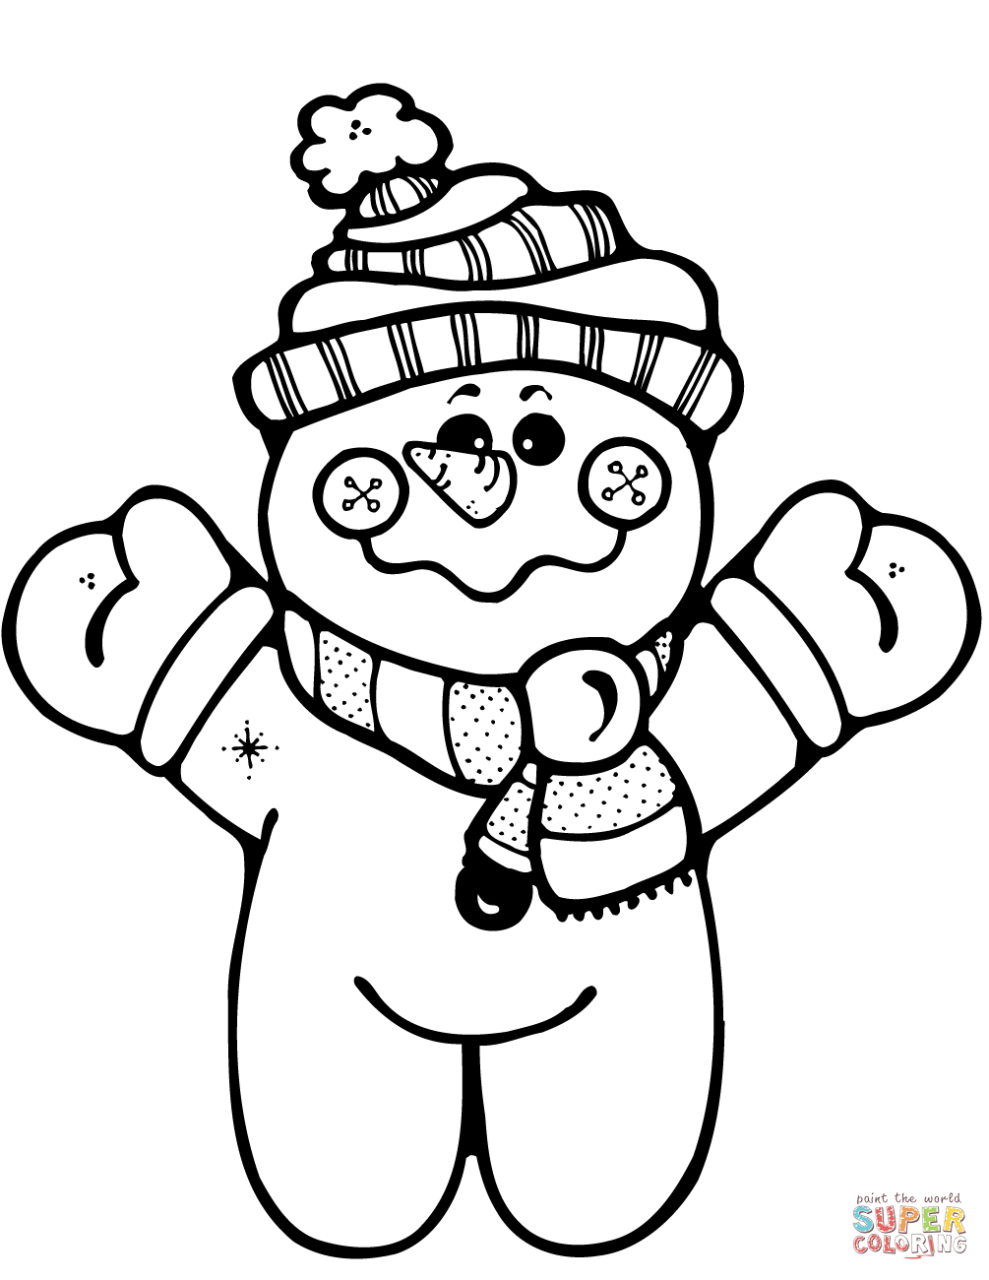 Coloring Page Of A Snowman